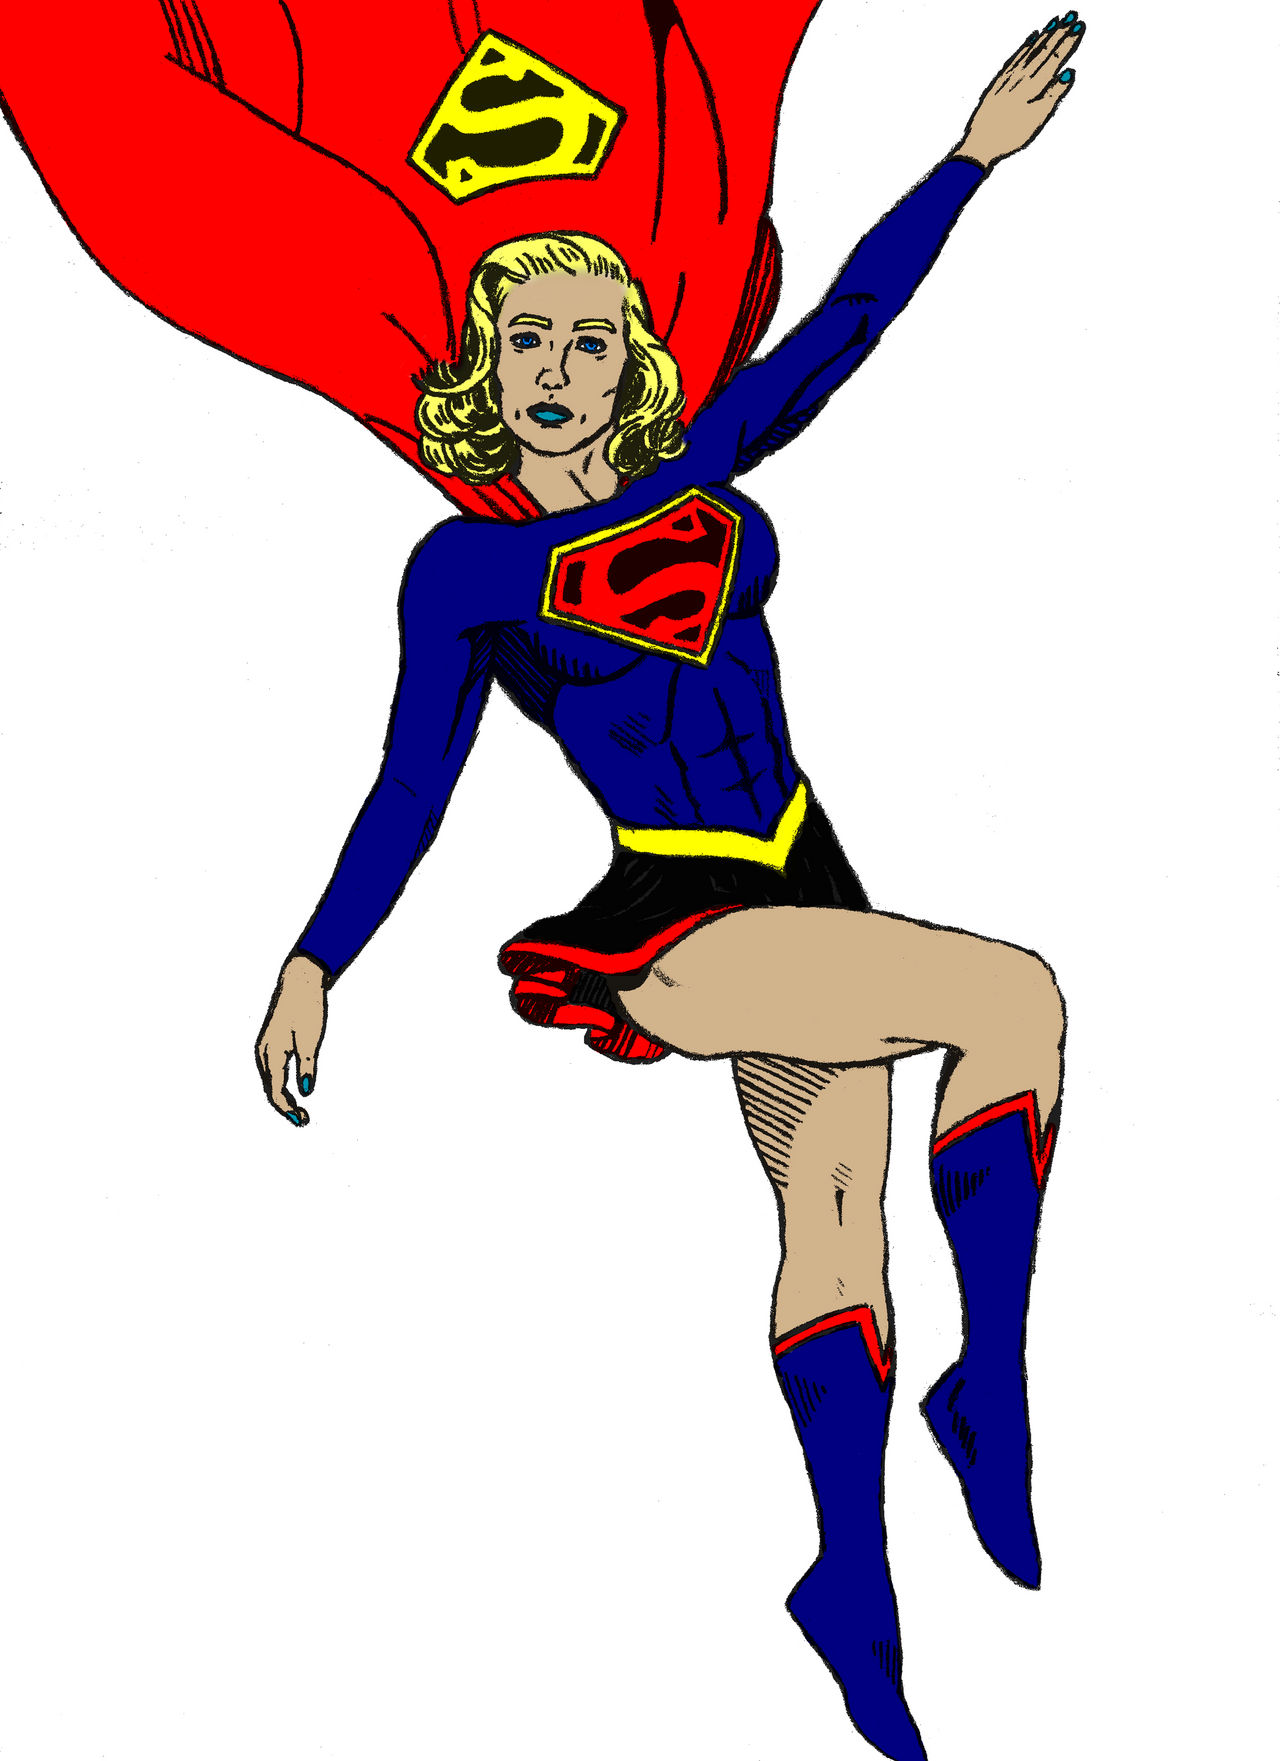 earth_356_supergirl_by_duracellenergizer_dcyuqnf-fullview.jpg